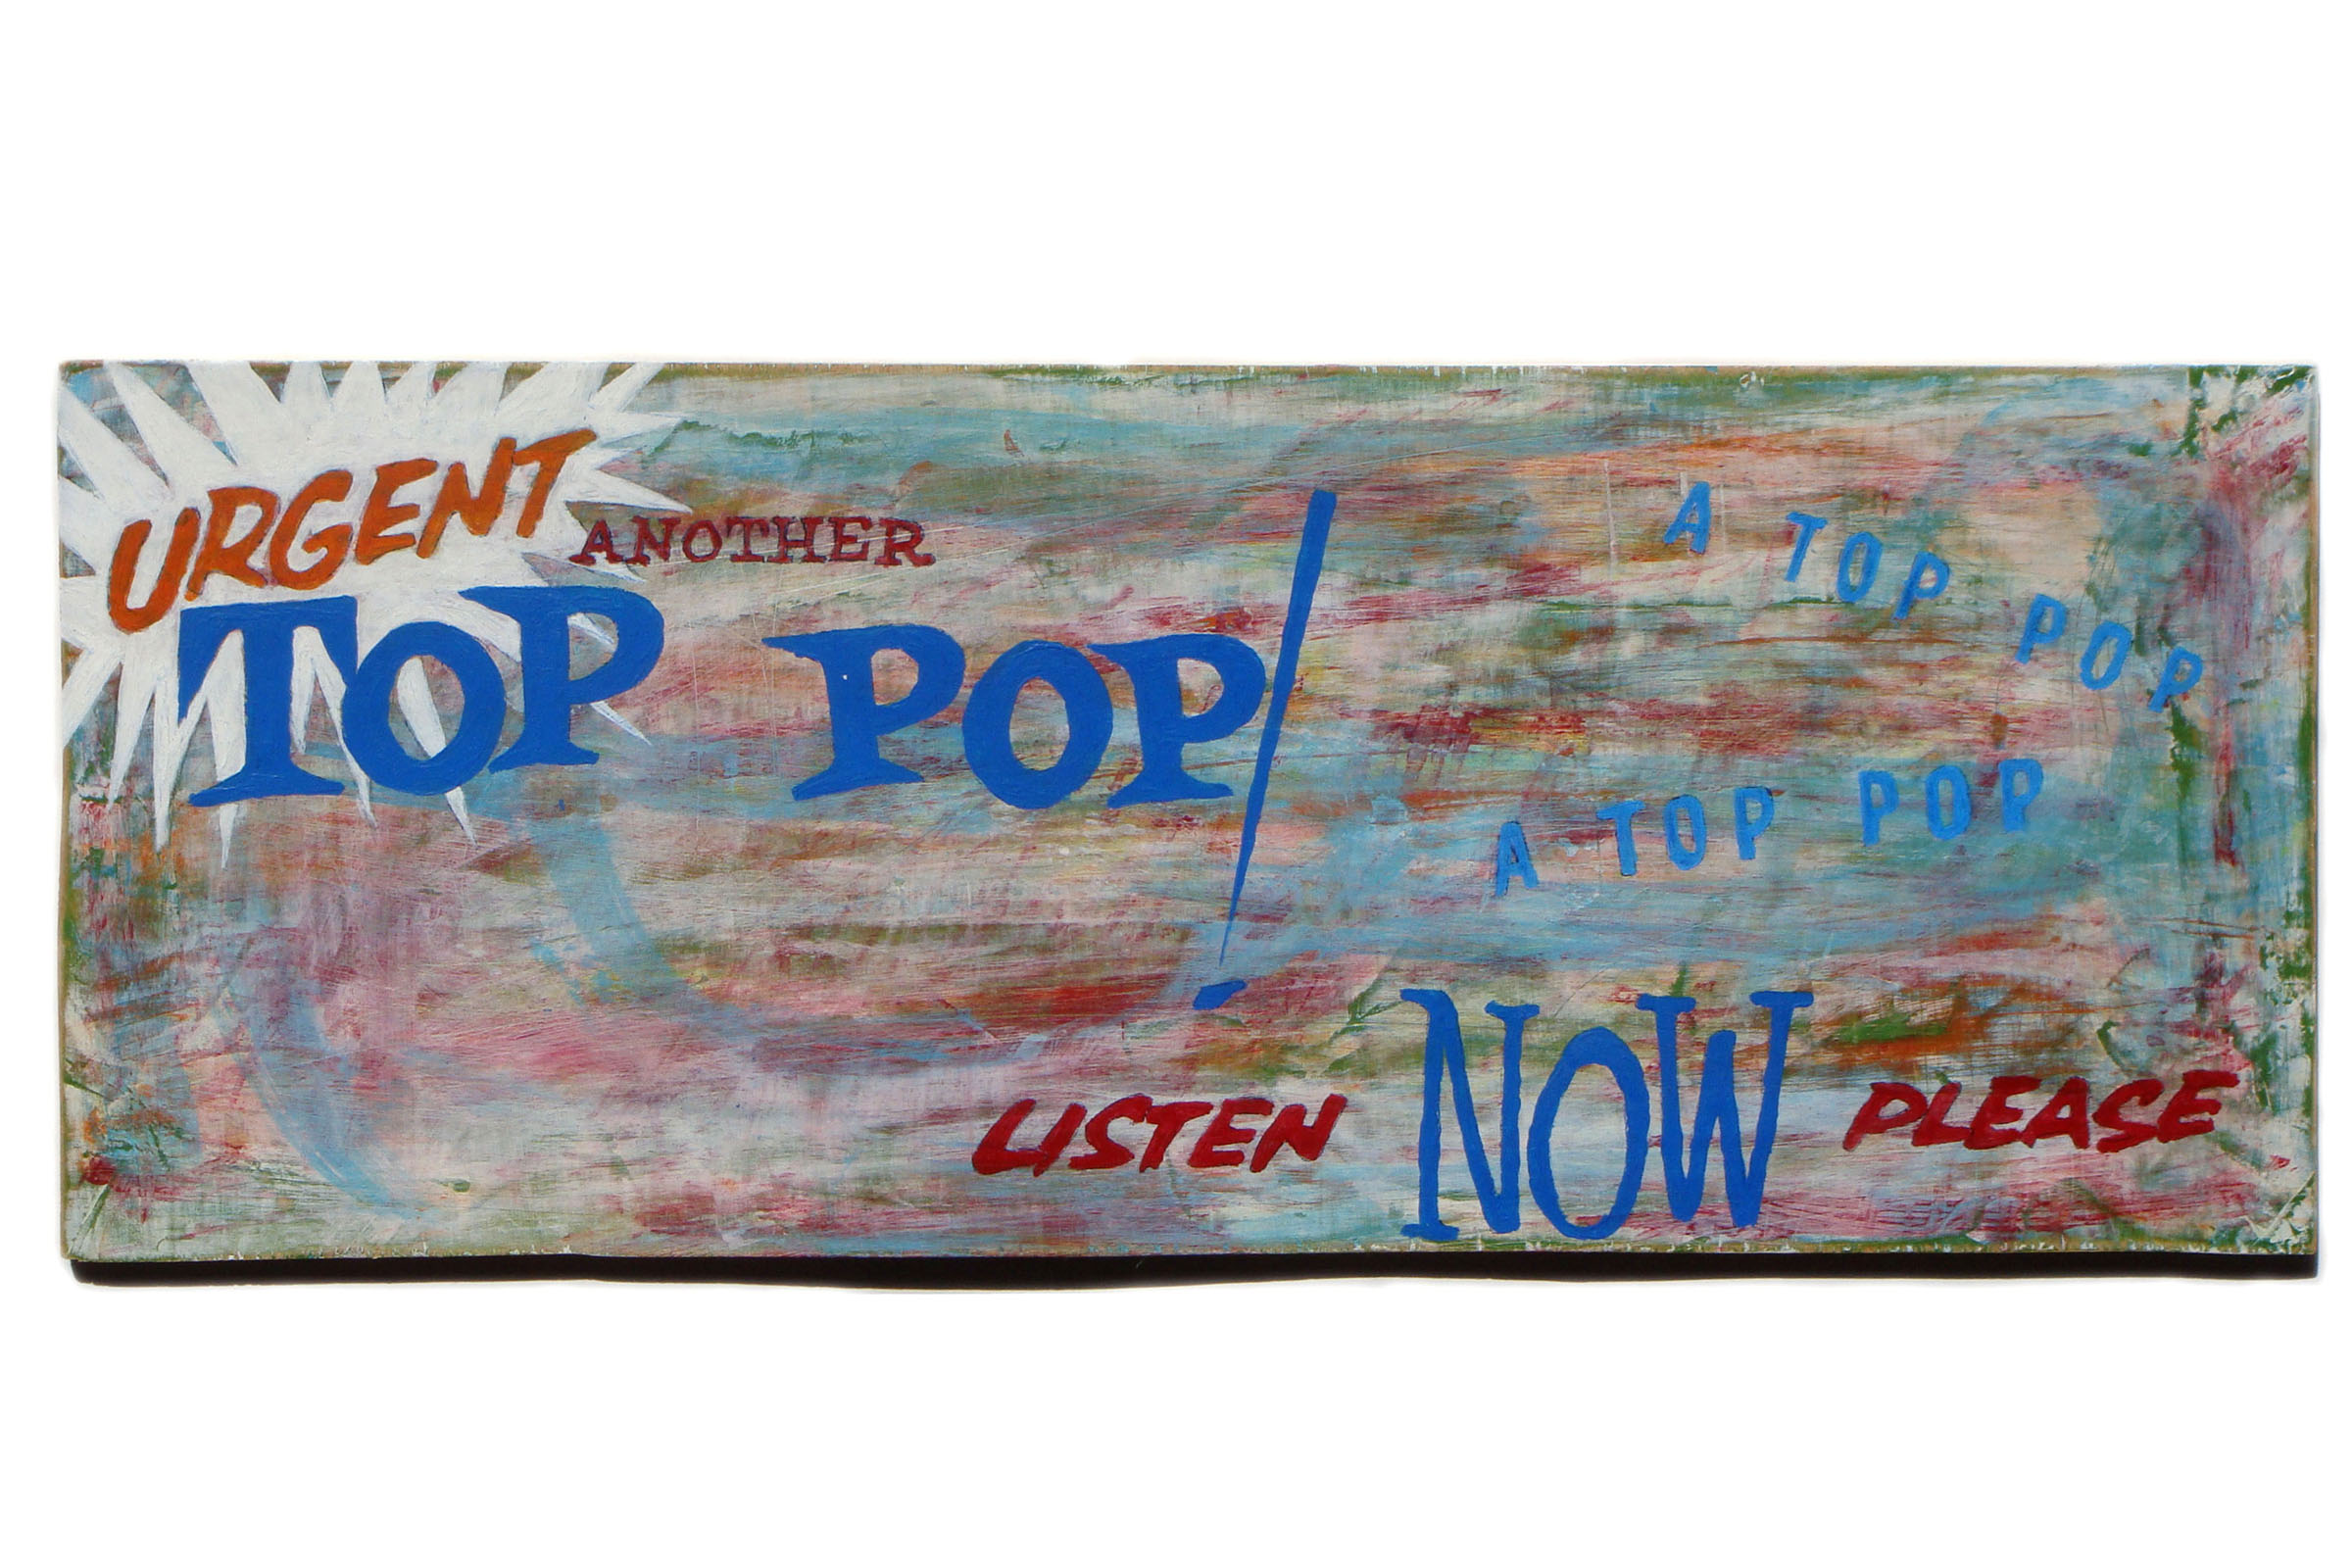 ANOTHER TOP POP<br>Acrylic paint on Plywood<br>46.5 x 18.5cm